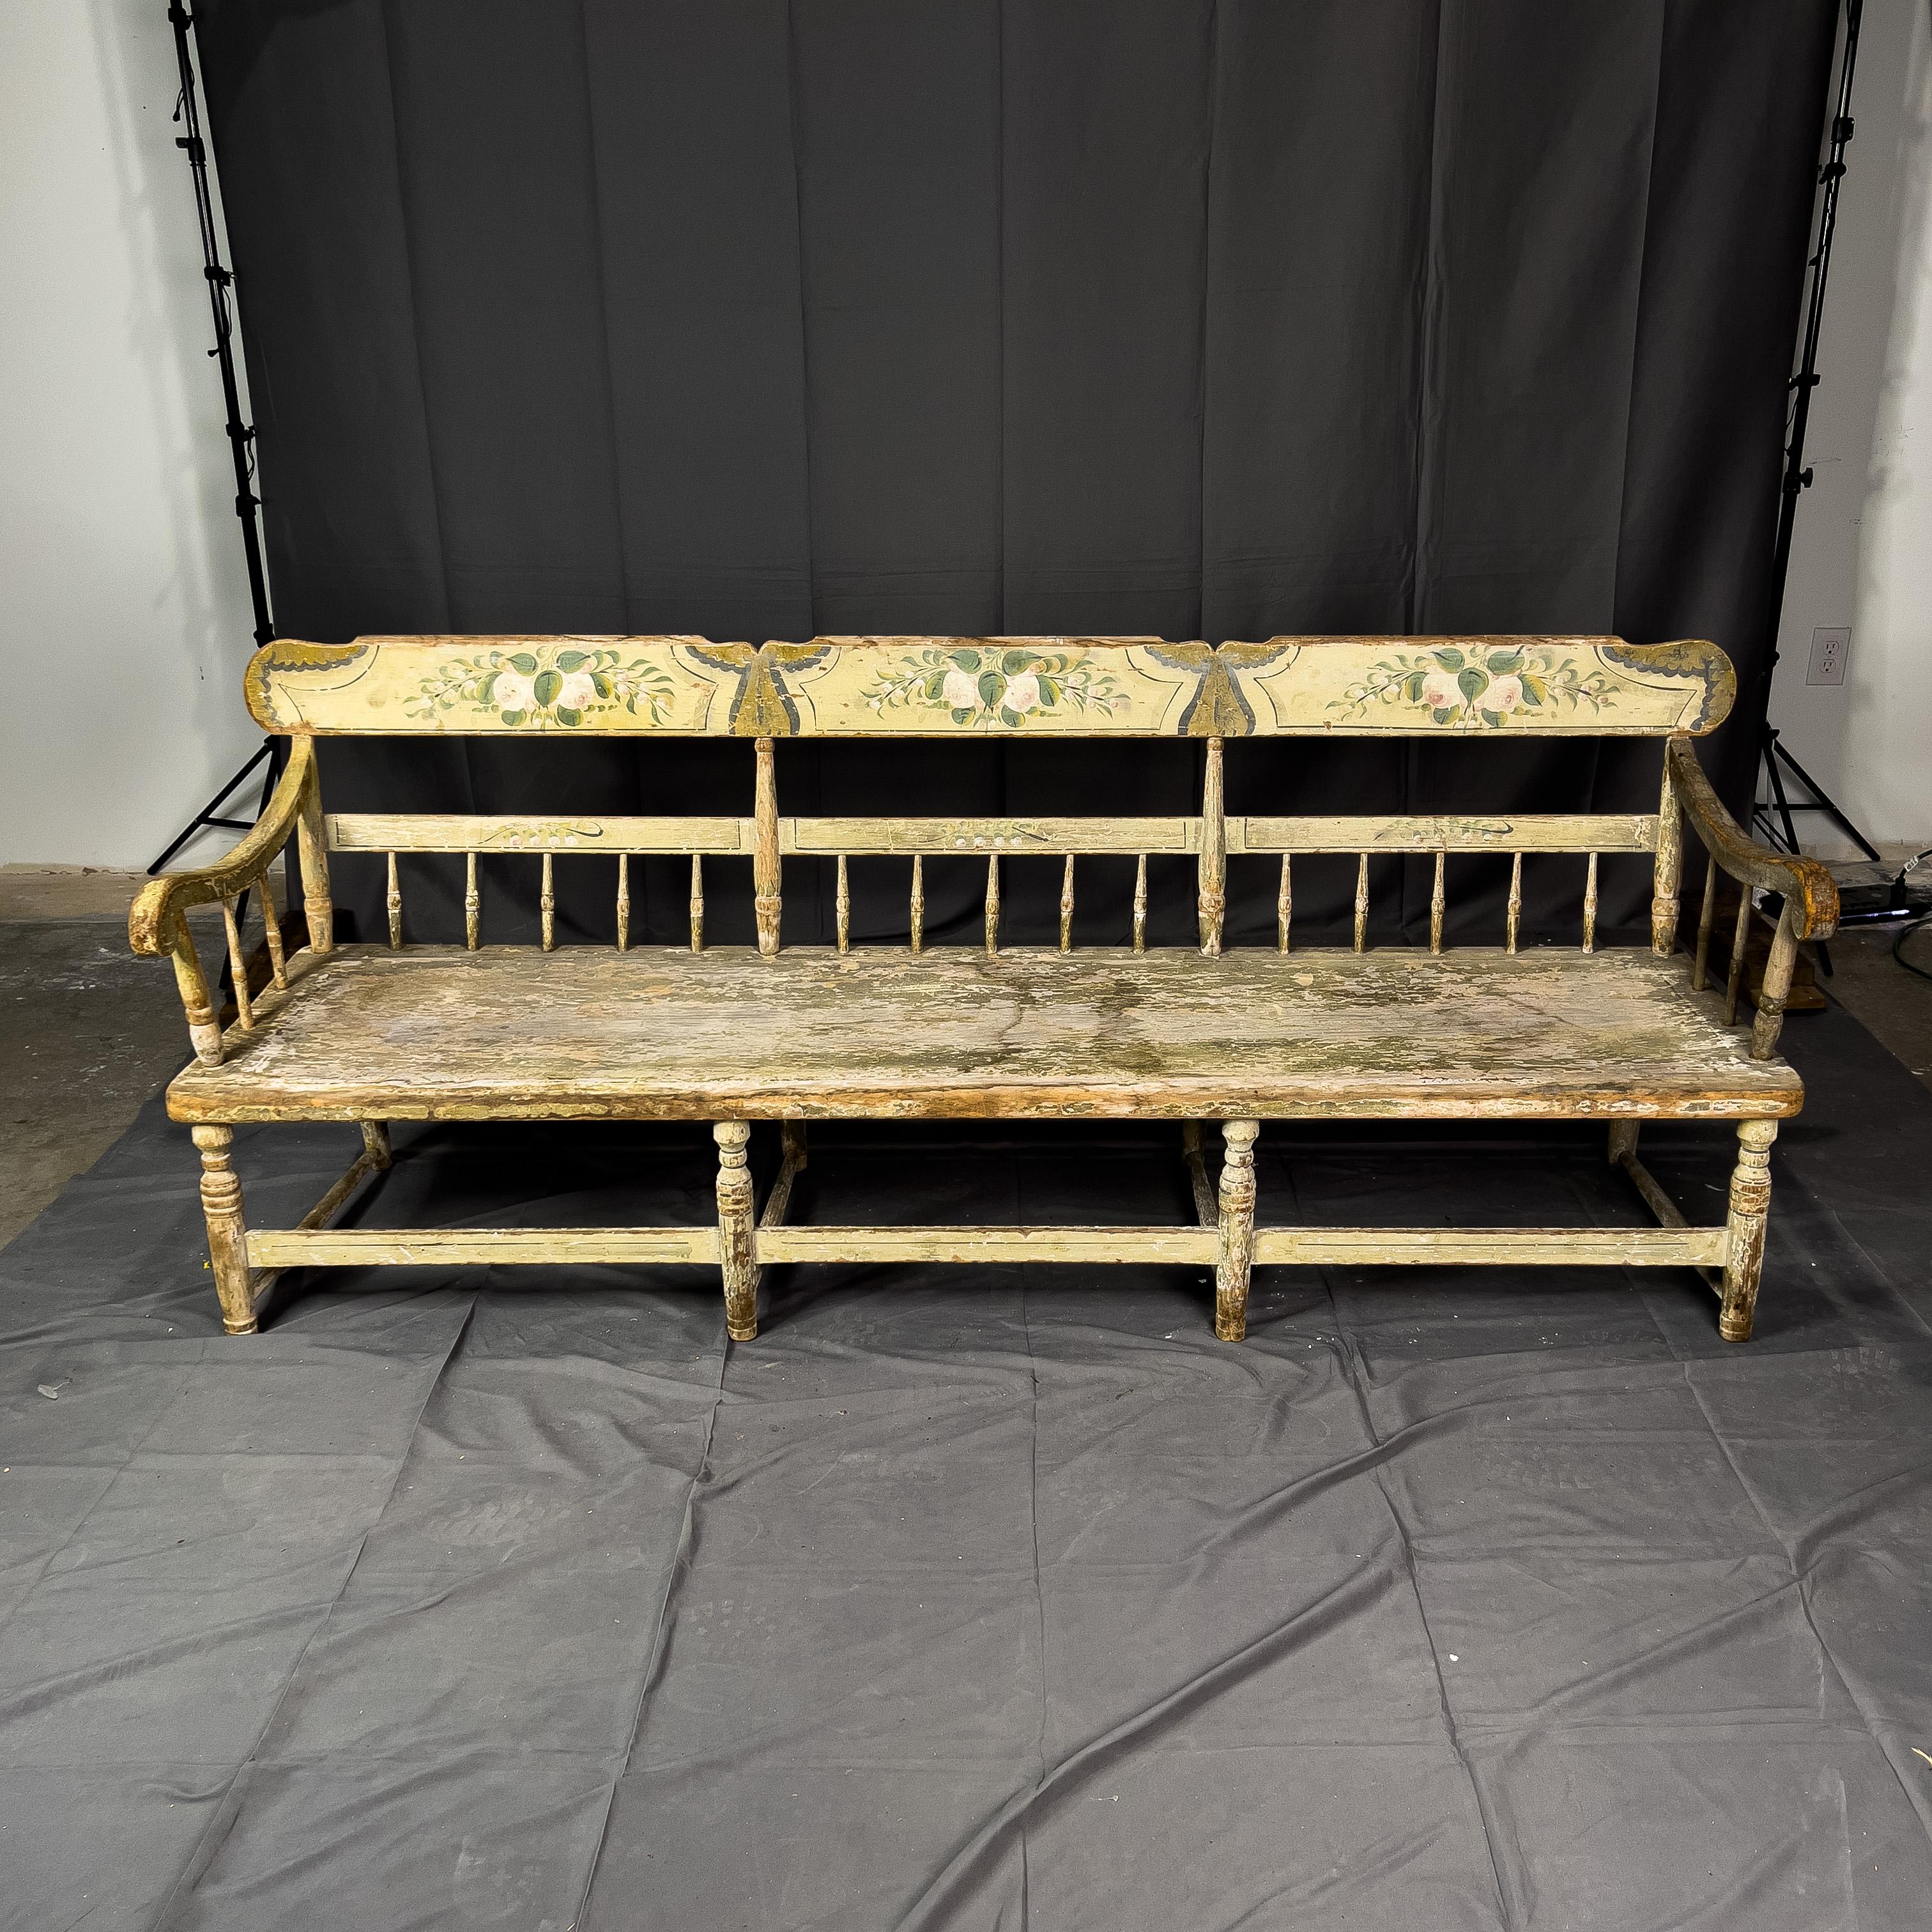 Swedish bench half-spindled and hand-painted. The bench has a half row of spindles on three sides above a long plank seat and is raised on eight tapering legs joined by spindled stretchers. This piece makes a very charming and decorative statement.